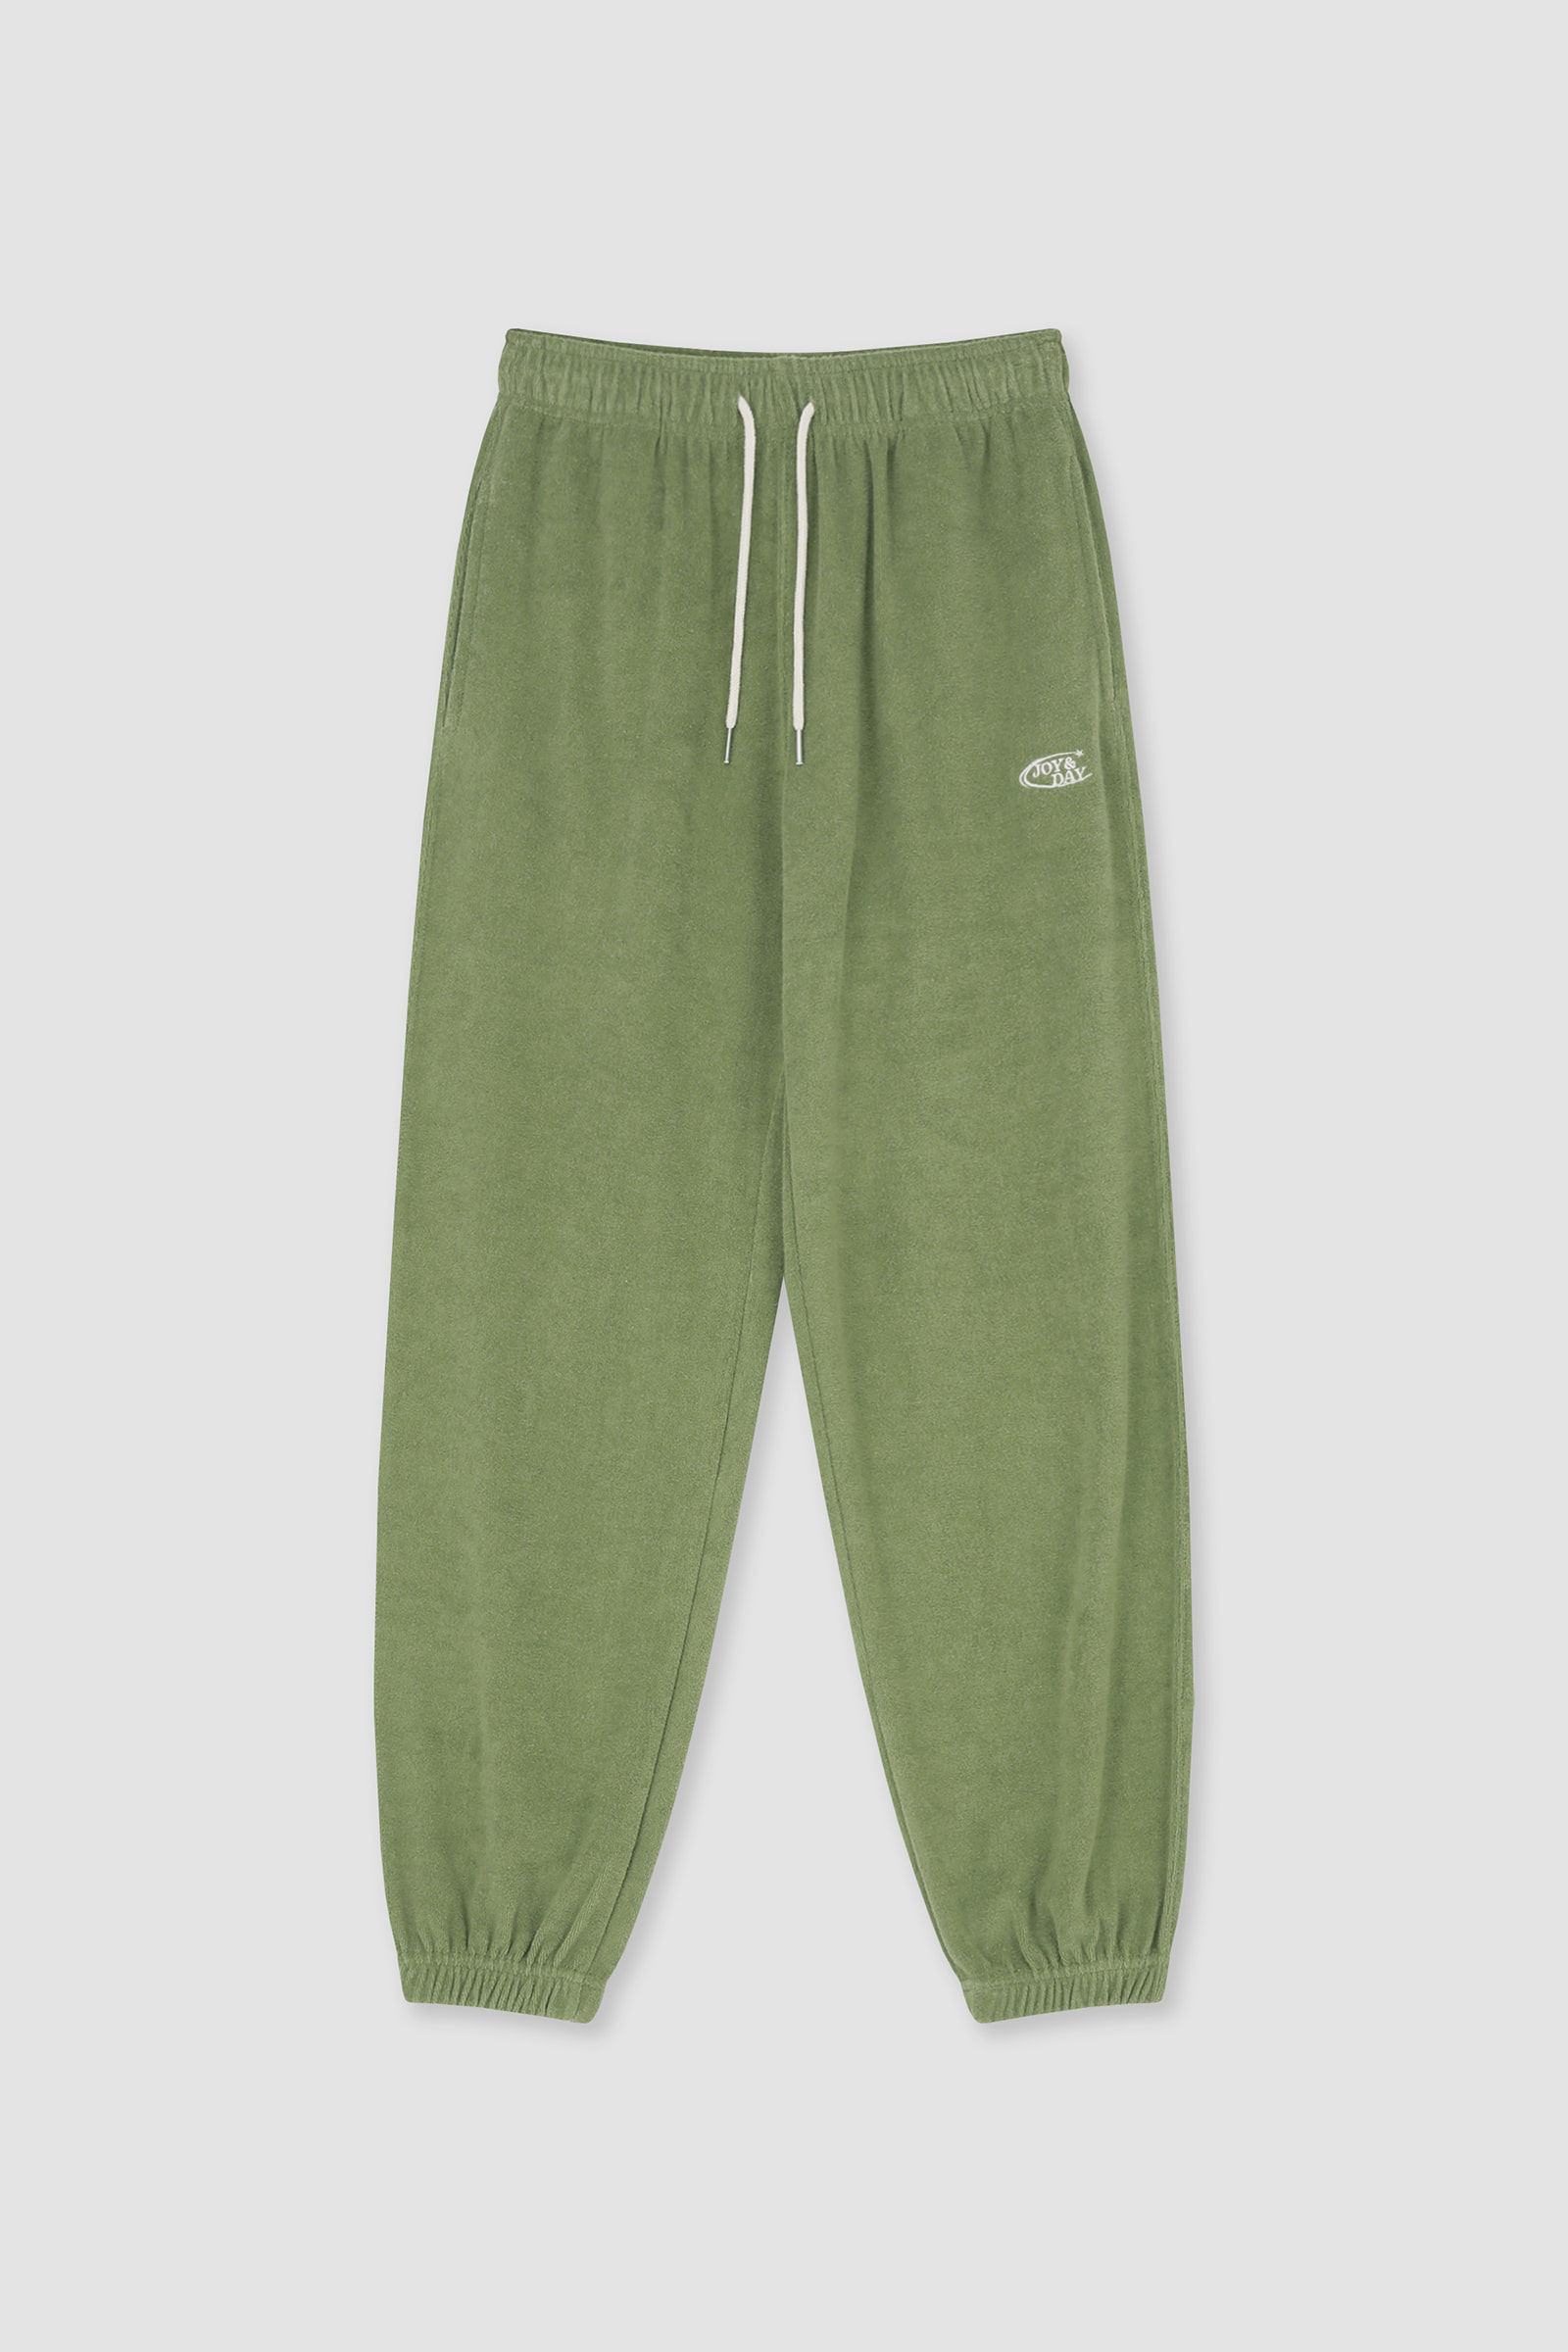 [13th] Terry Jogger Pants